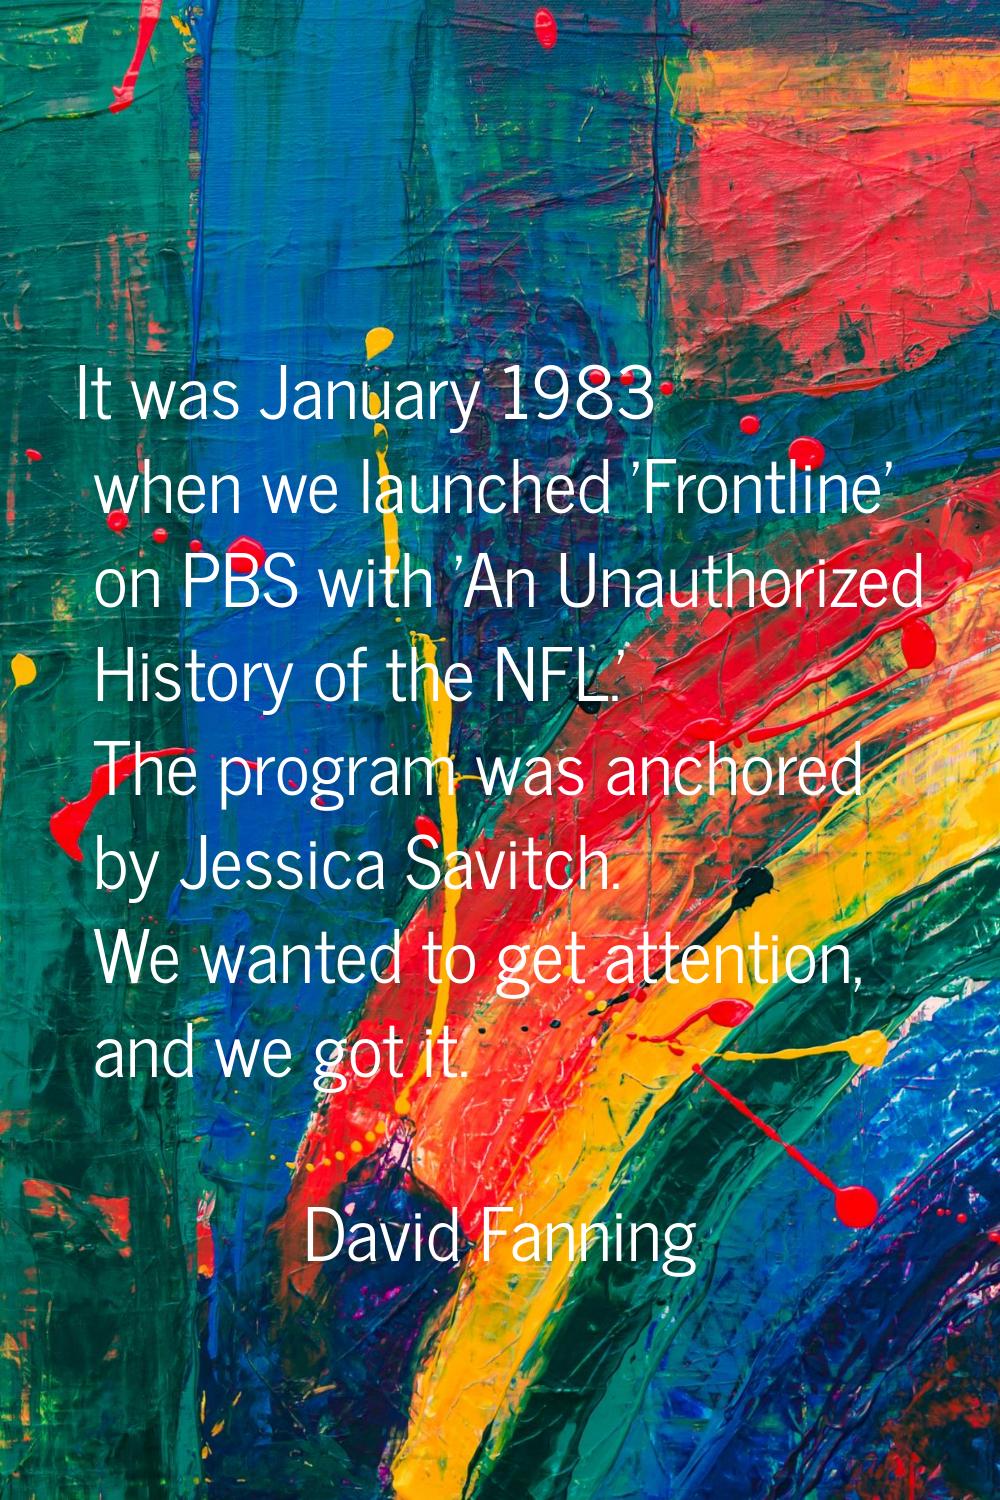 It was January 1983 when we launched 'Frontline' on PBS with 'An Unauthorized History of the NFL.' 